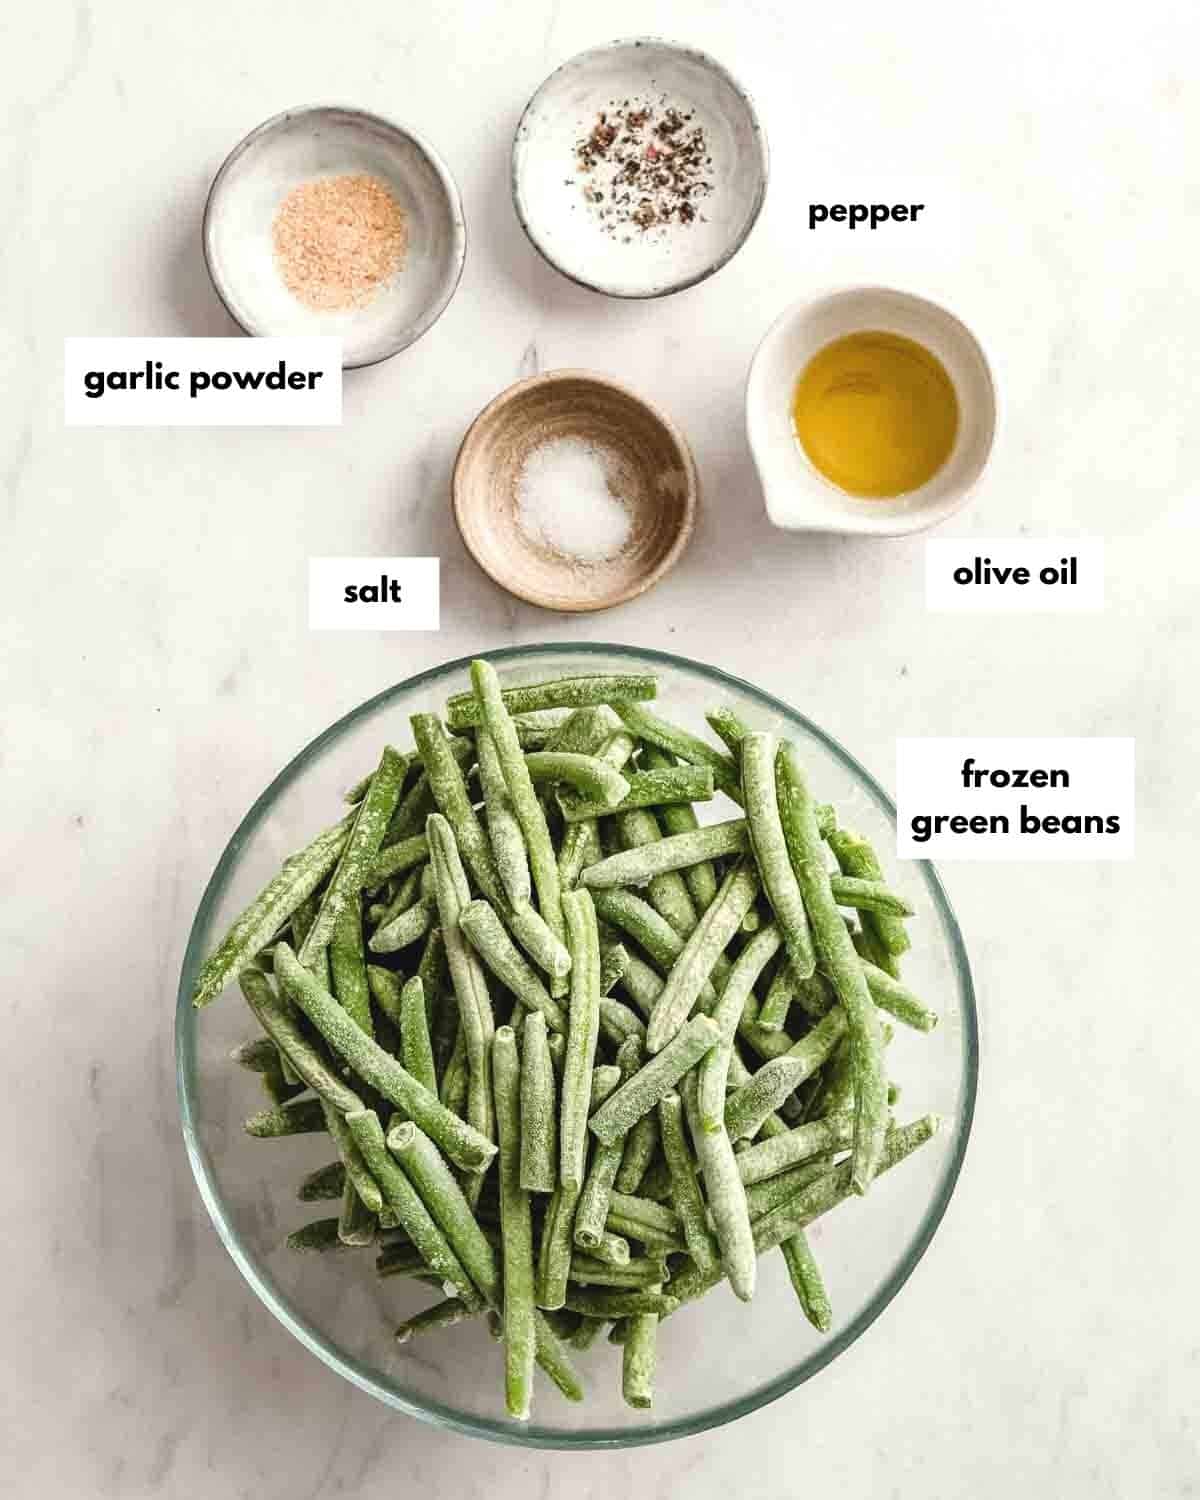 all ingredients needed for roasted frozen green beans.